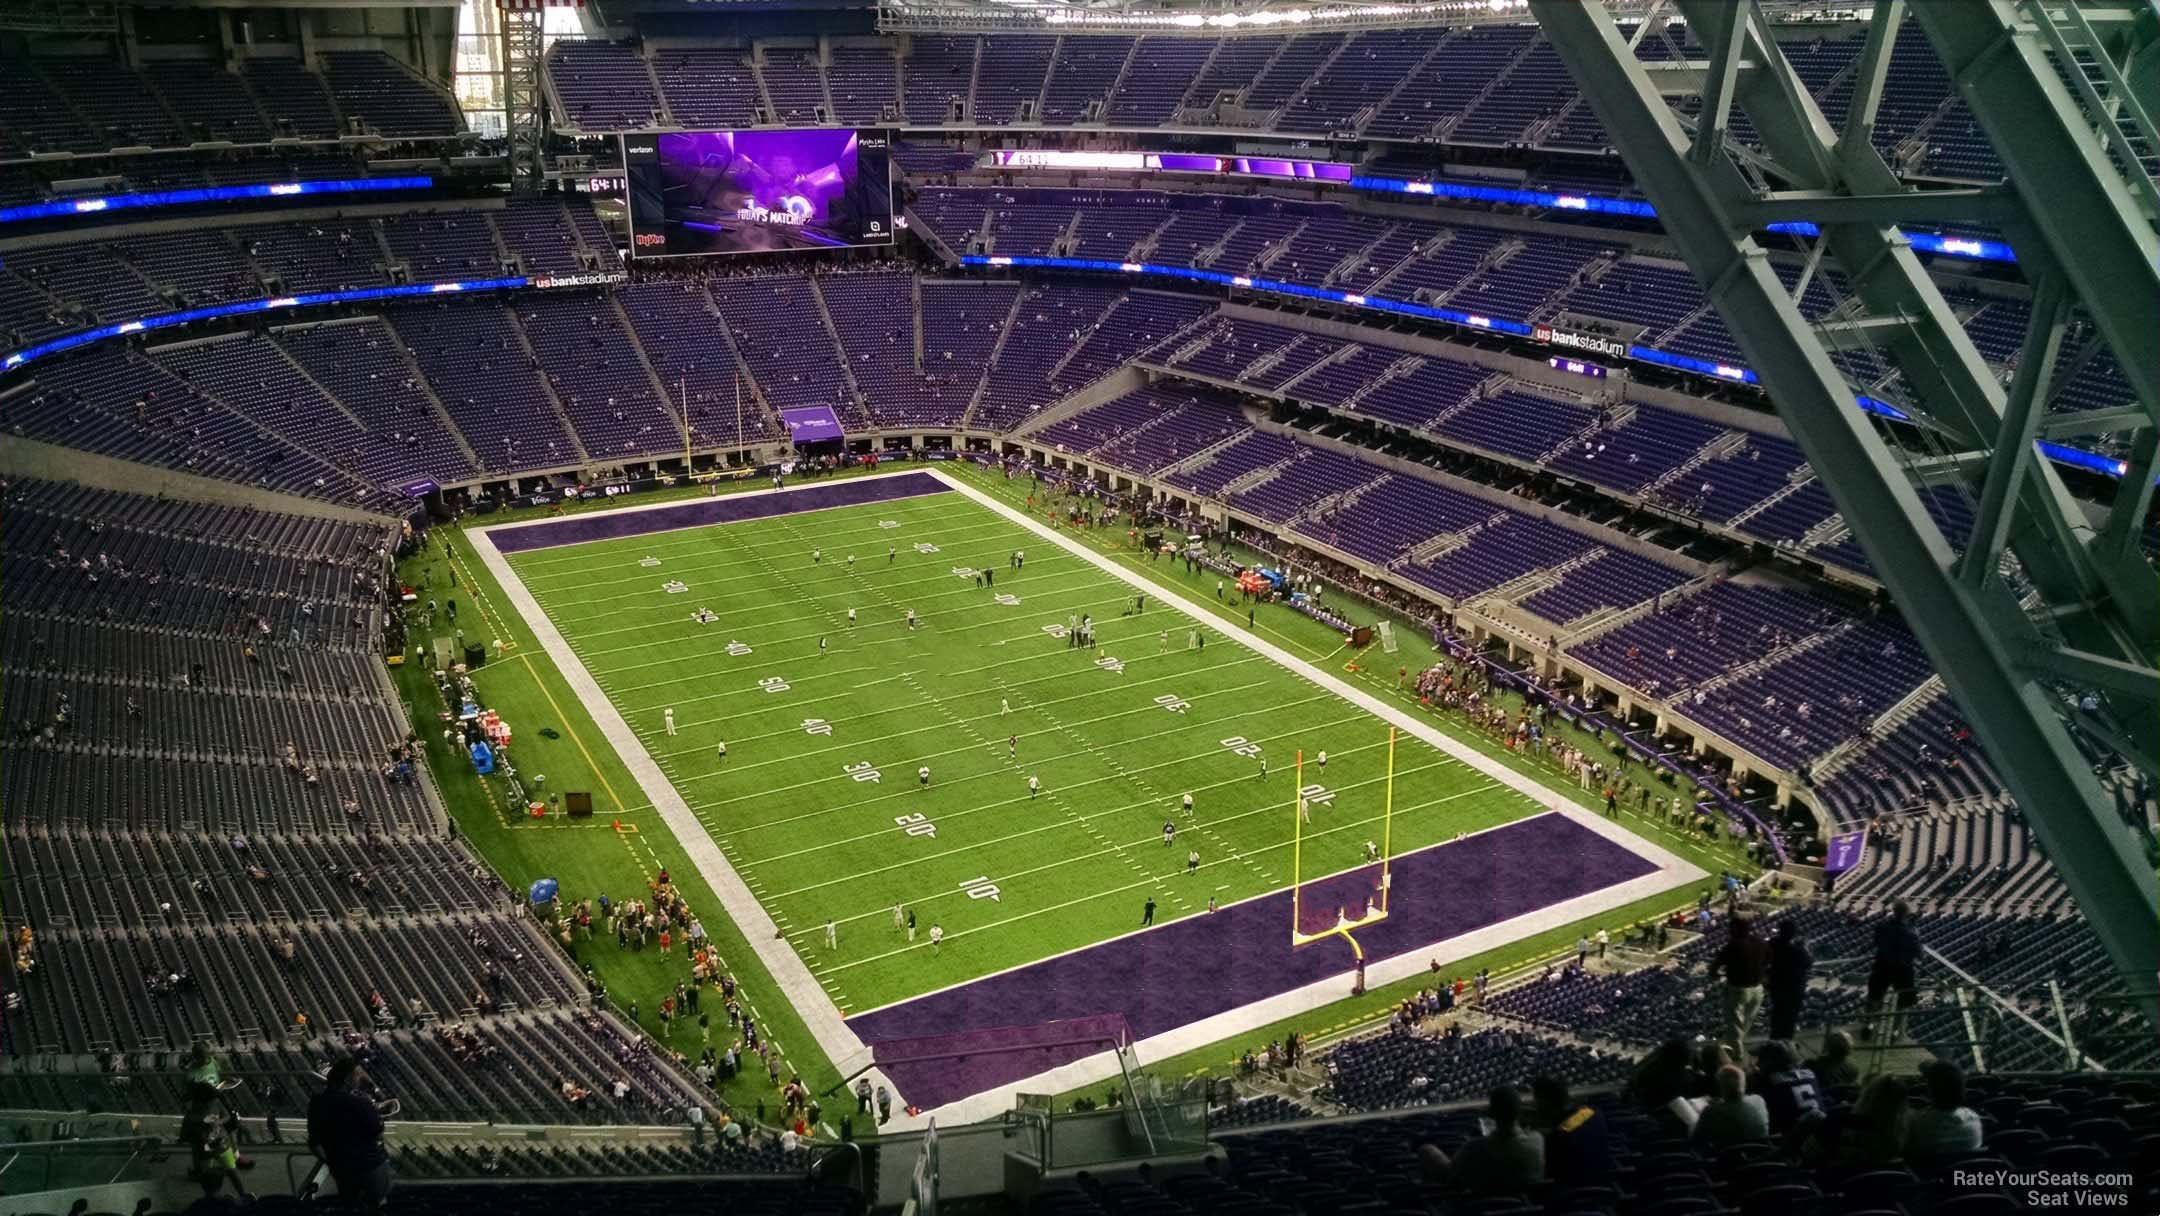 section 301, row 15 seat view  for football - u.s. bank stadium